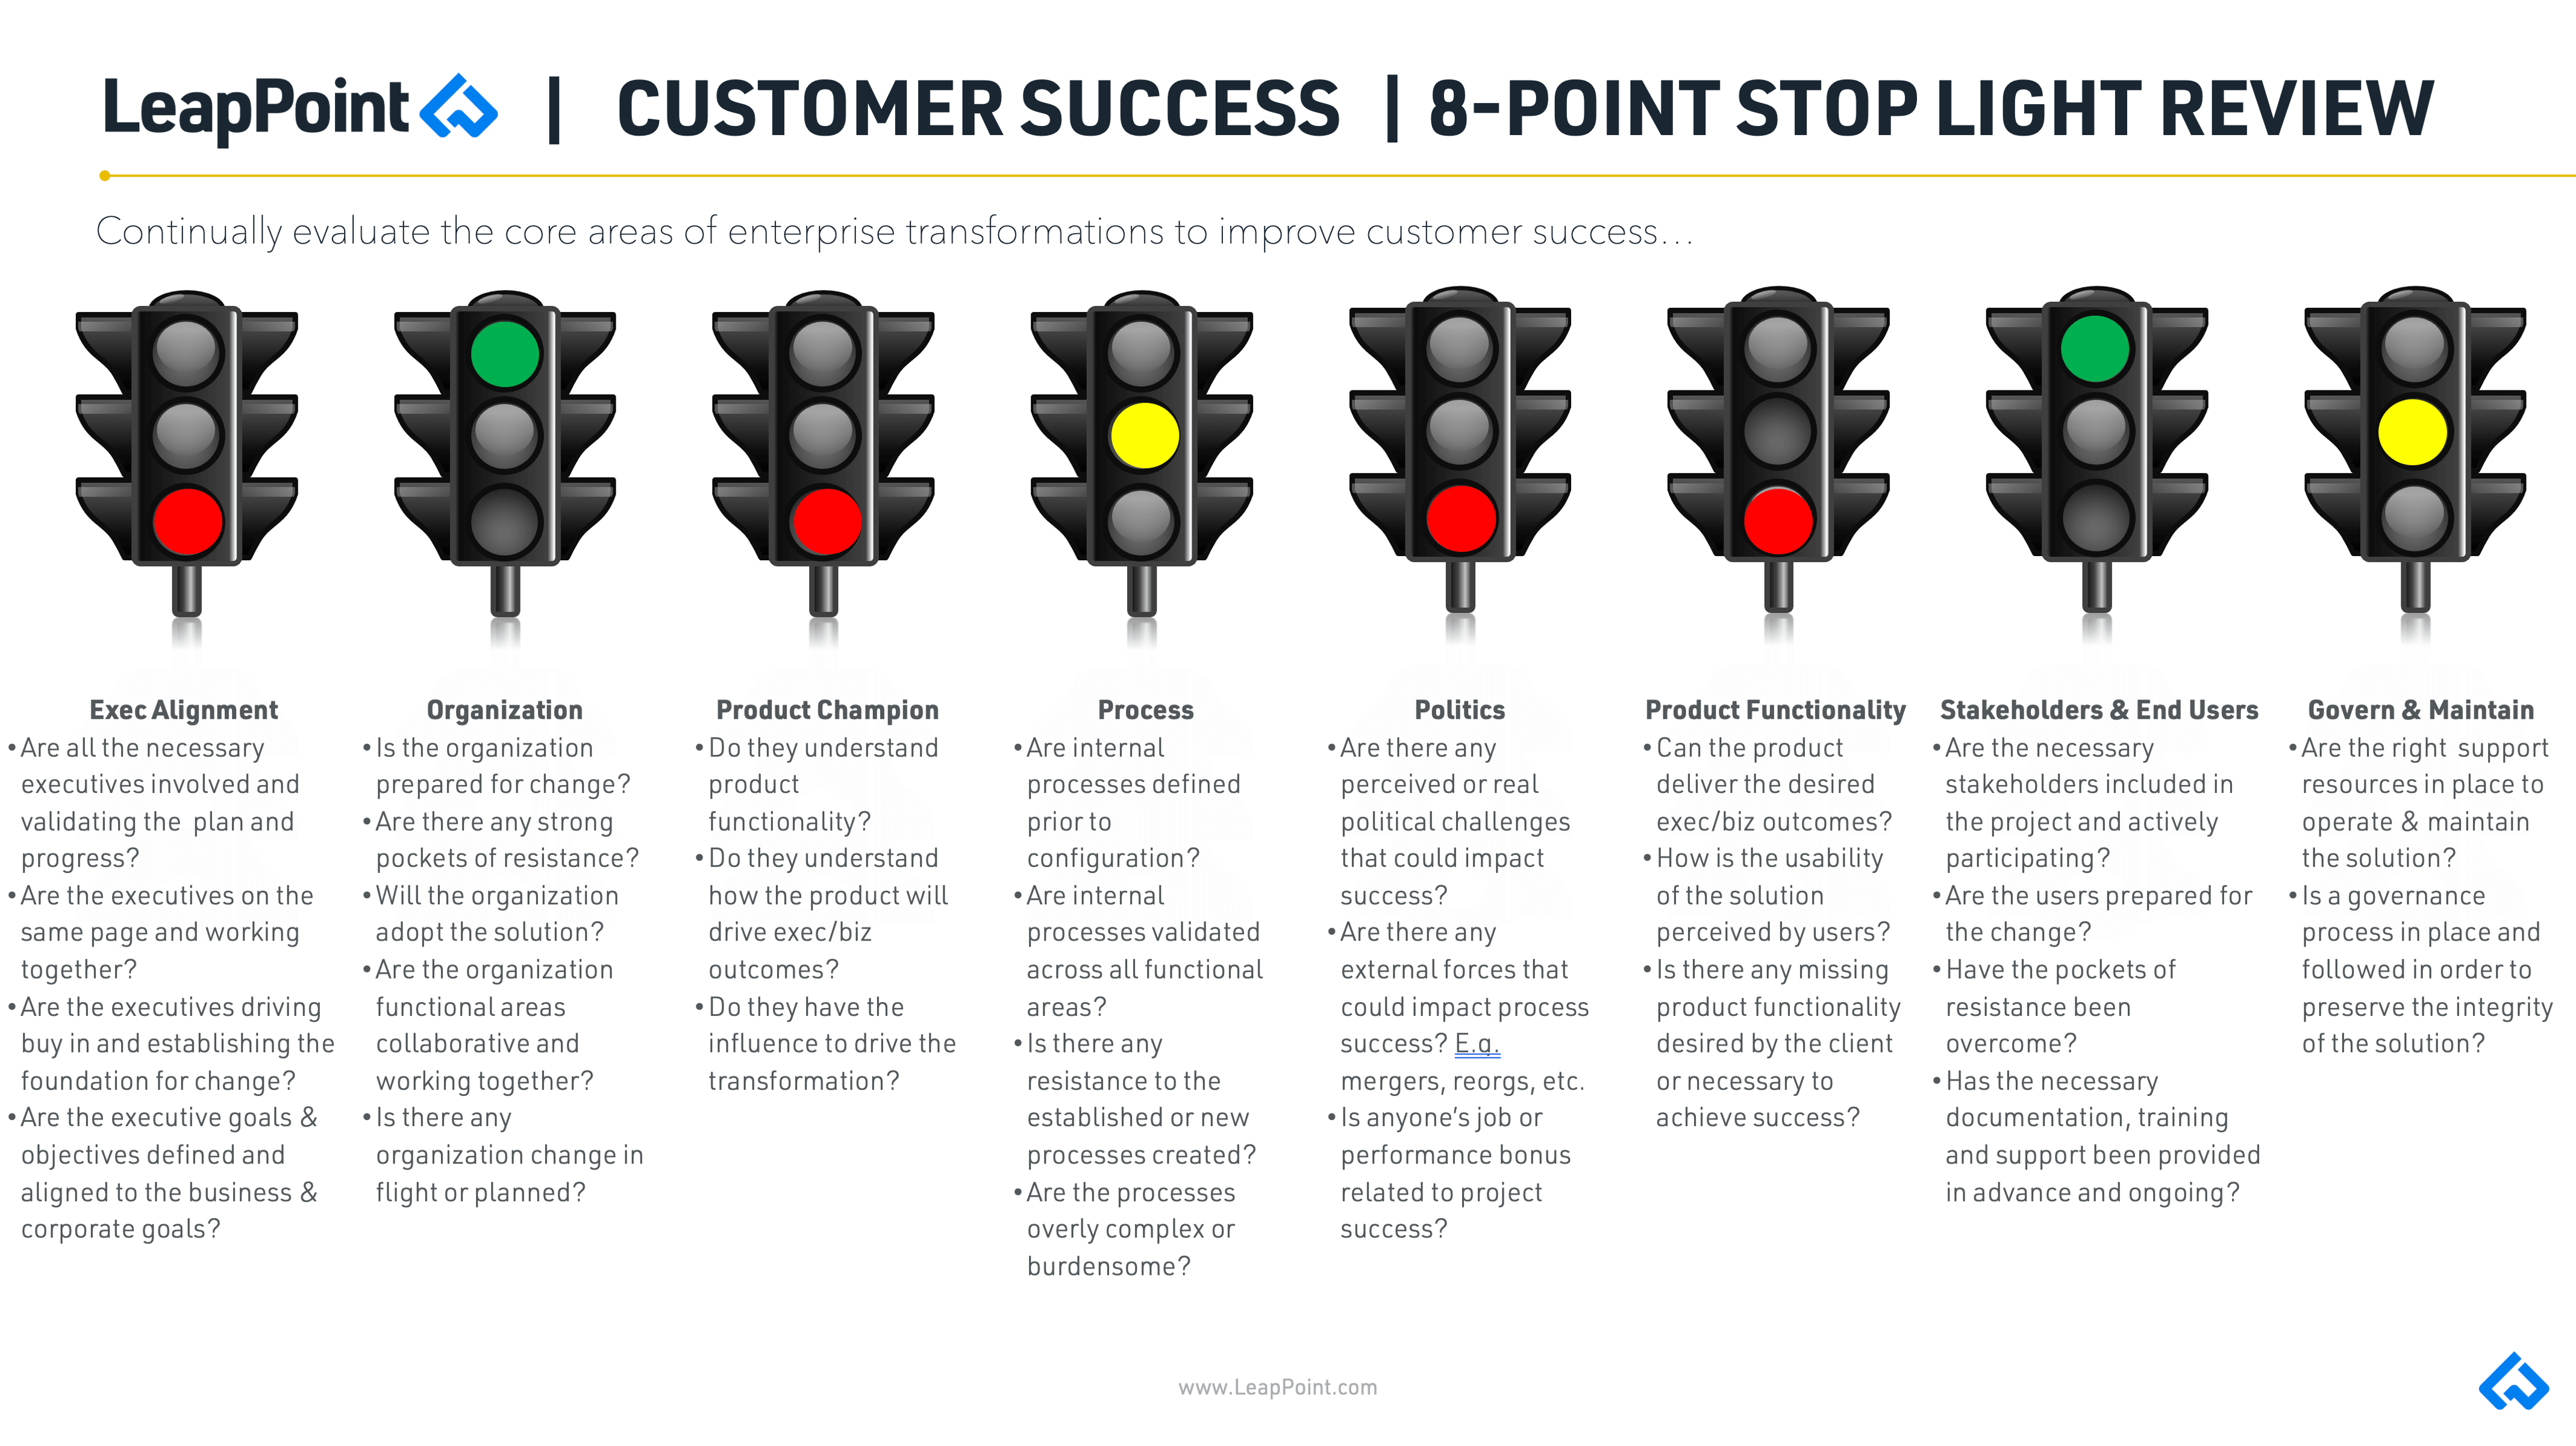 crossbeam-leappoint-8-point-stop-light-review-chart-customer-success